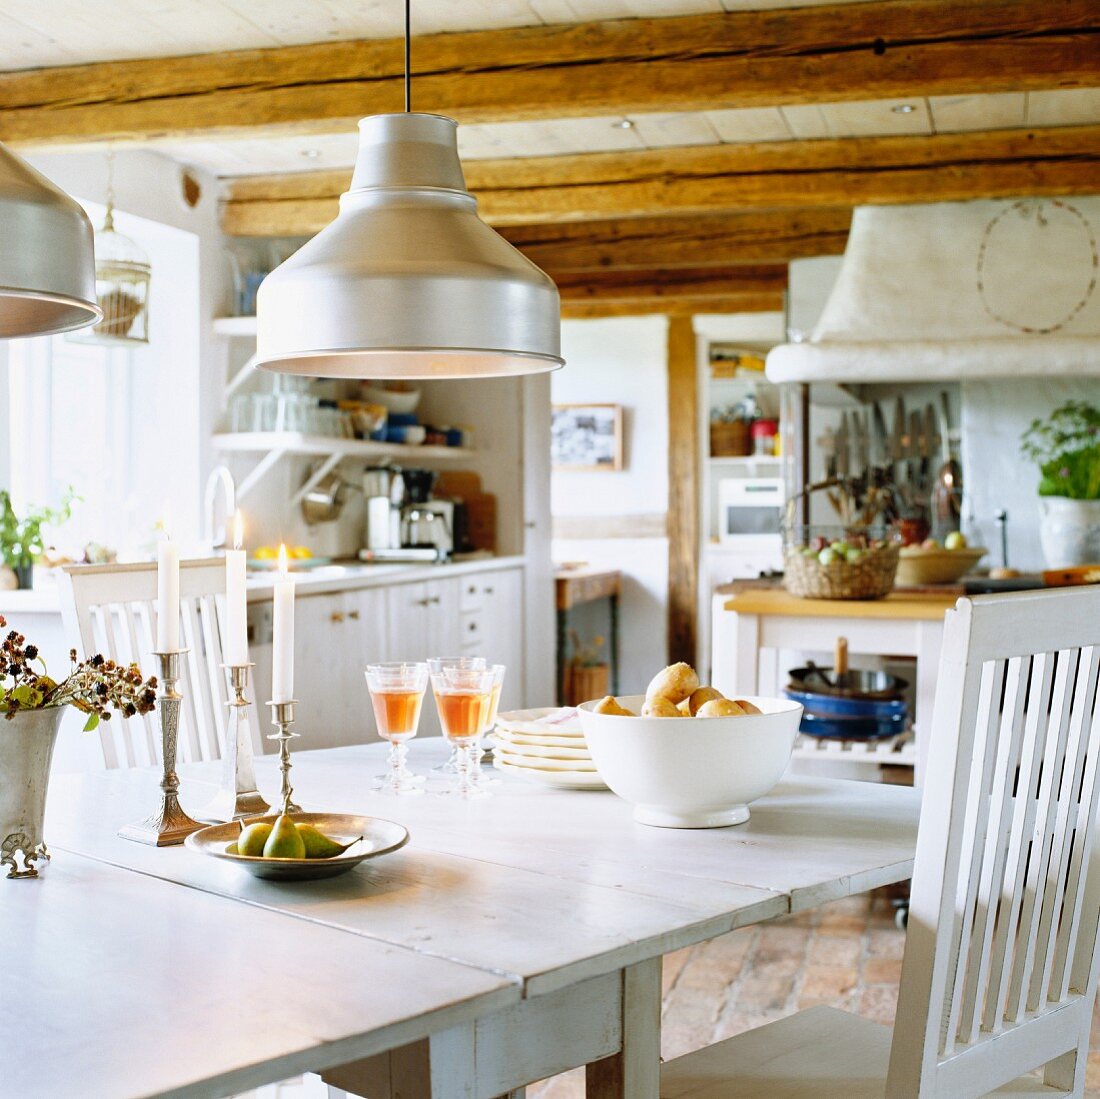 Dining table in rustic kitchen with wood-beamed ceiling